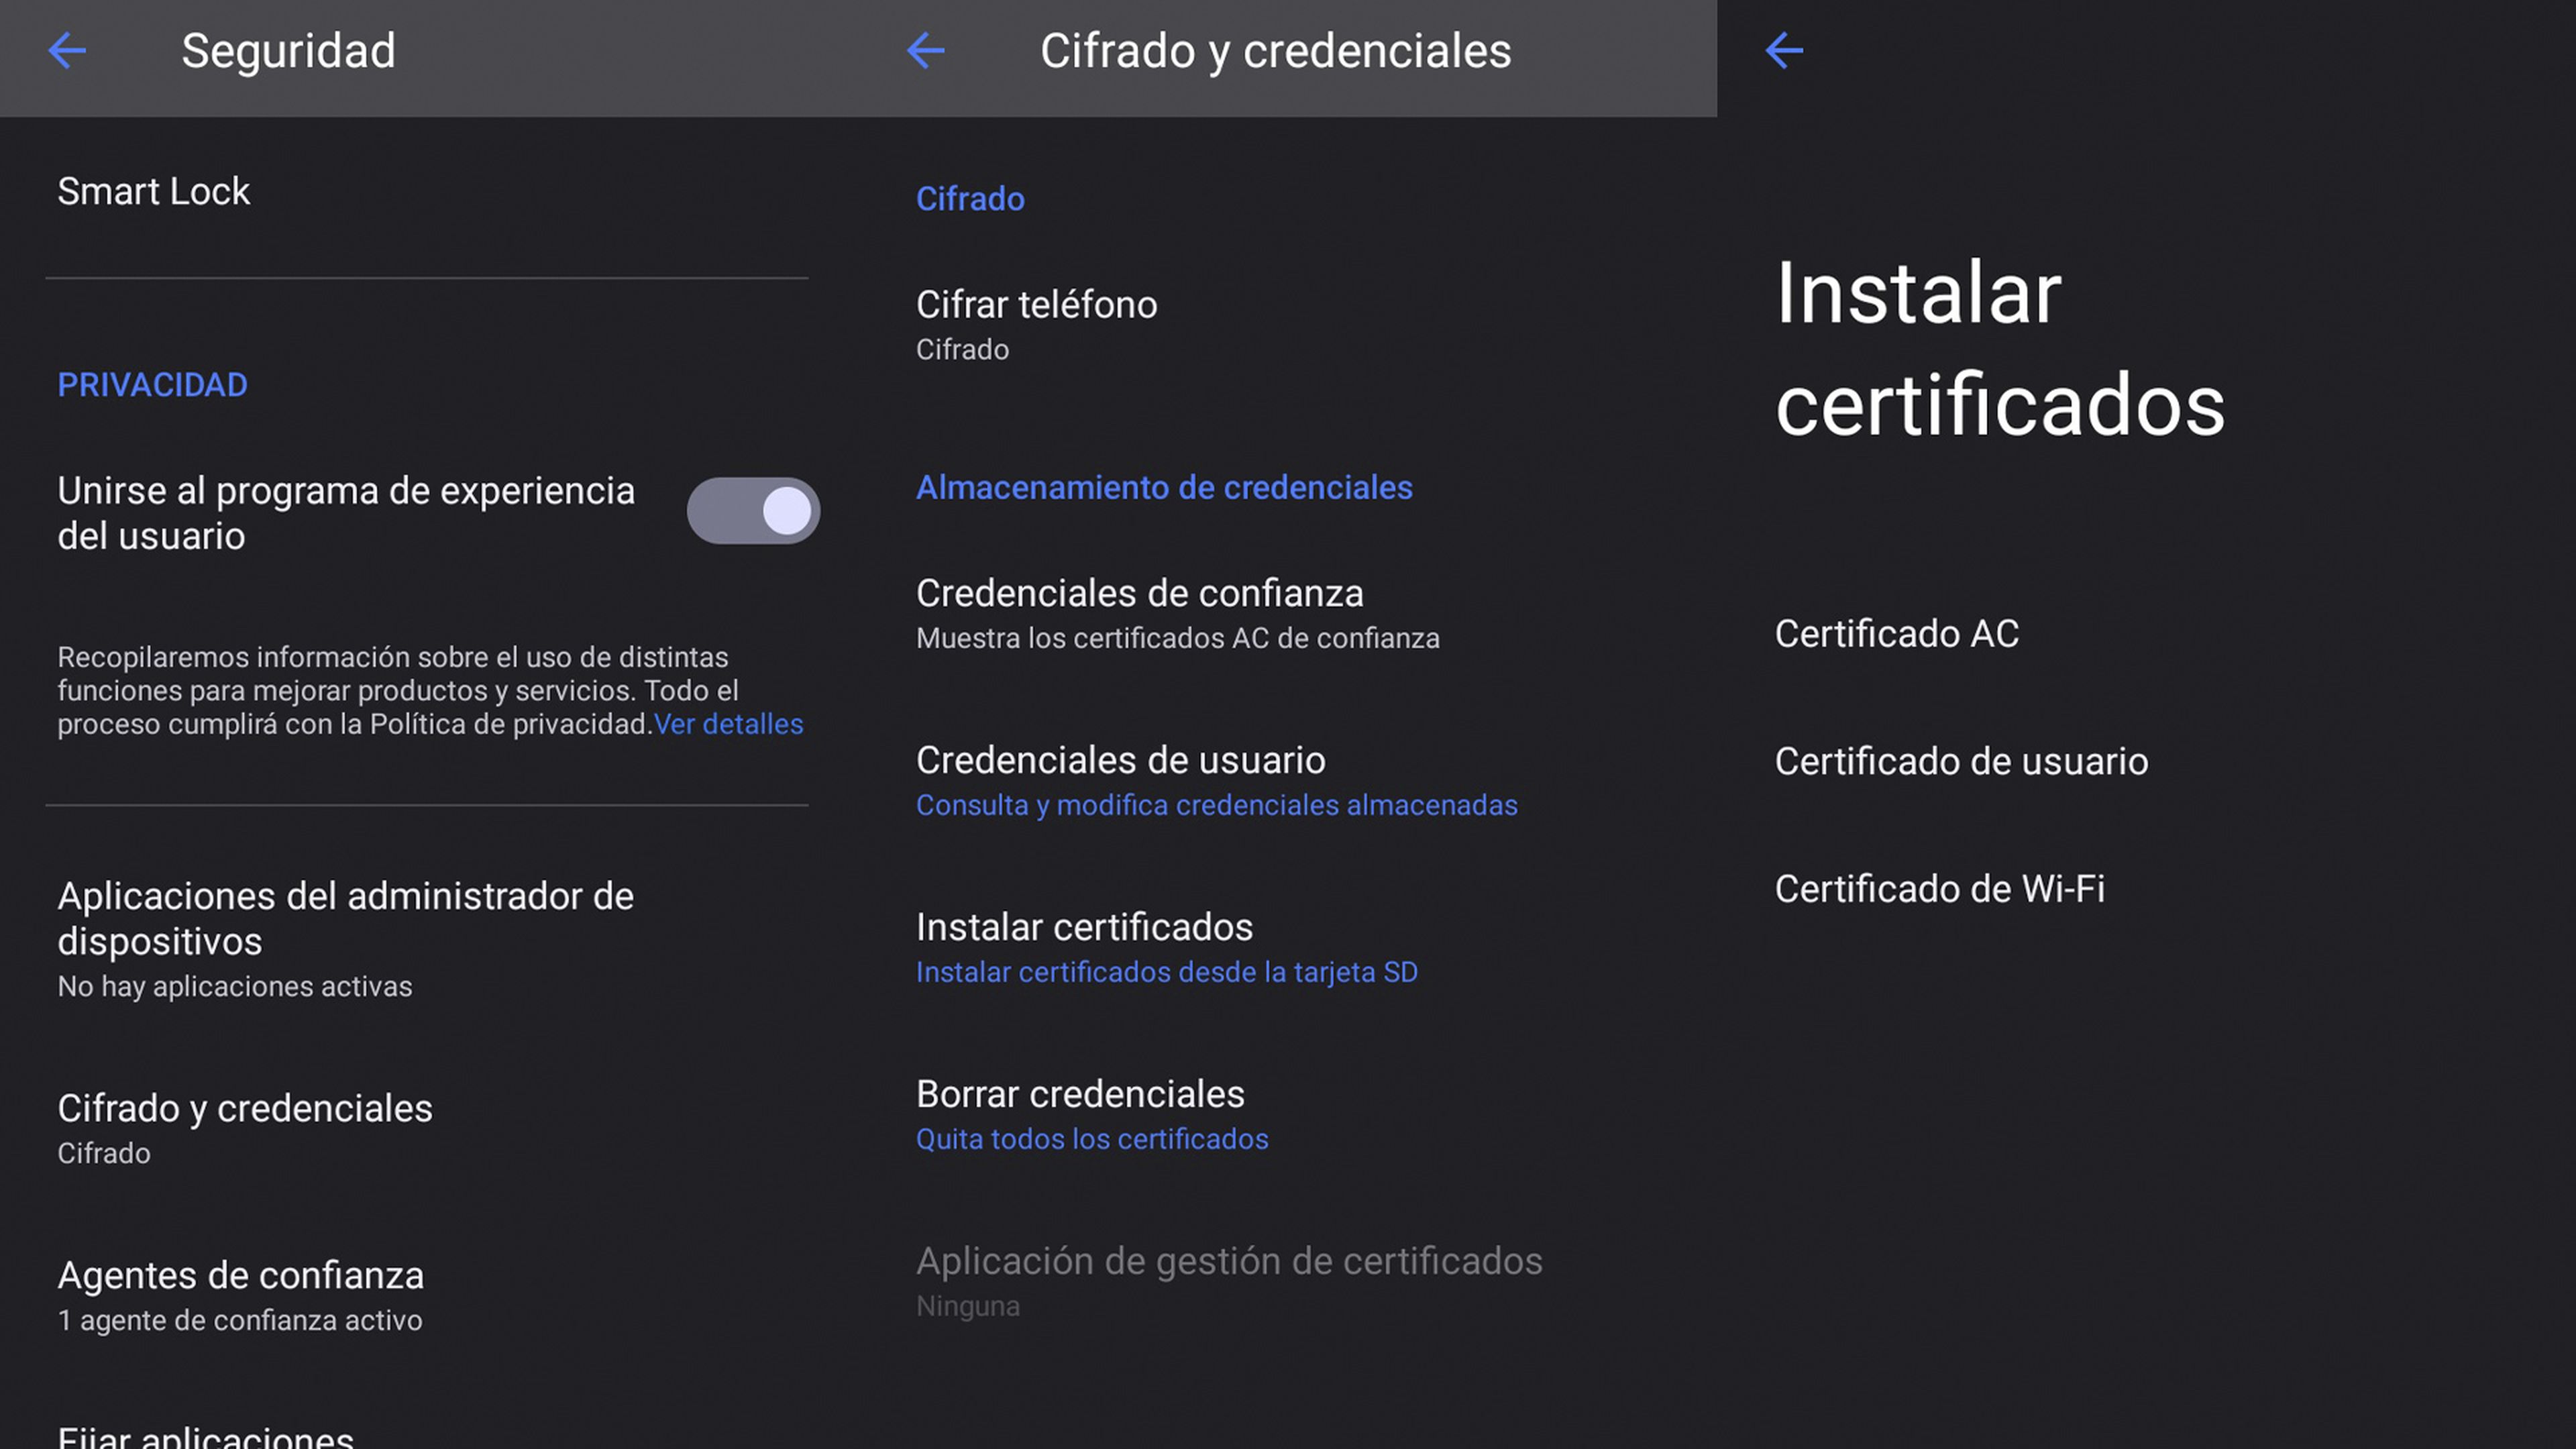 Install certificate on Android